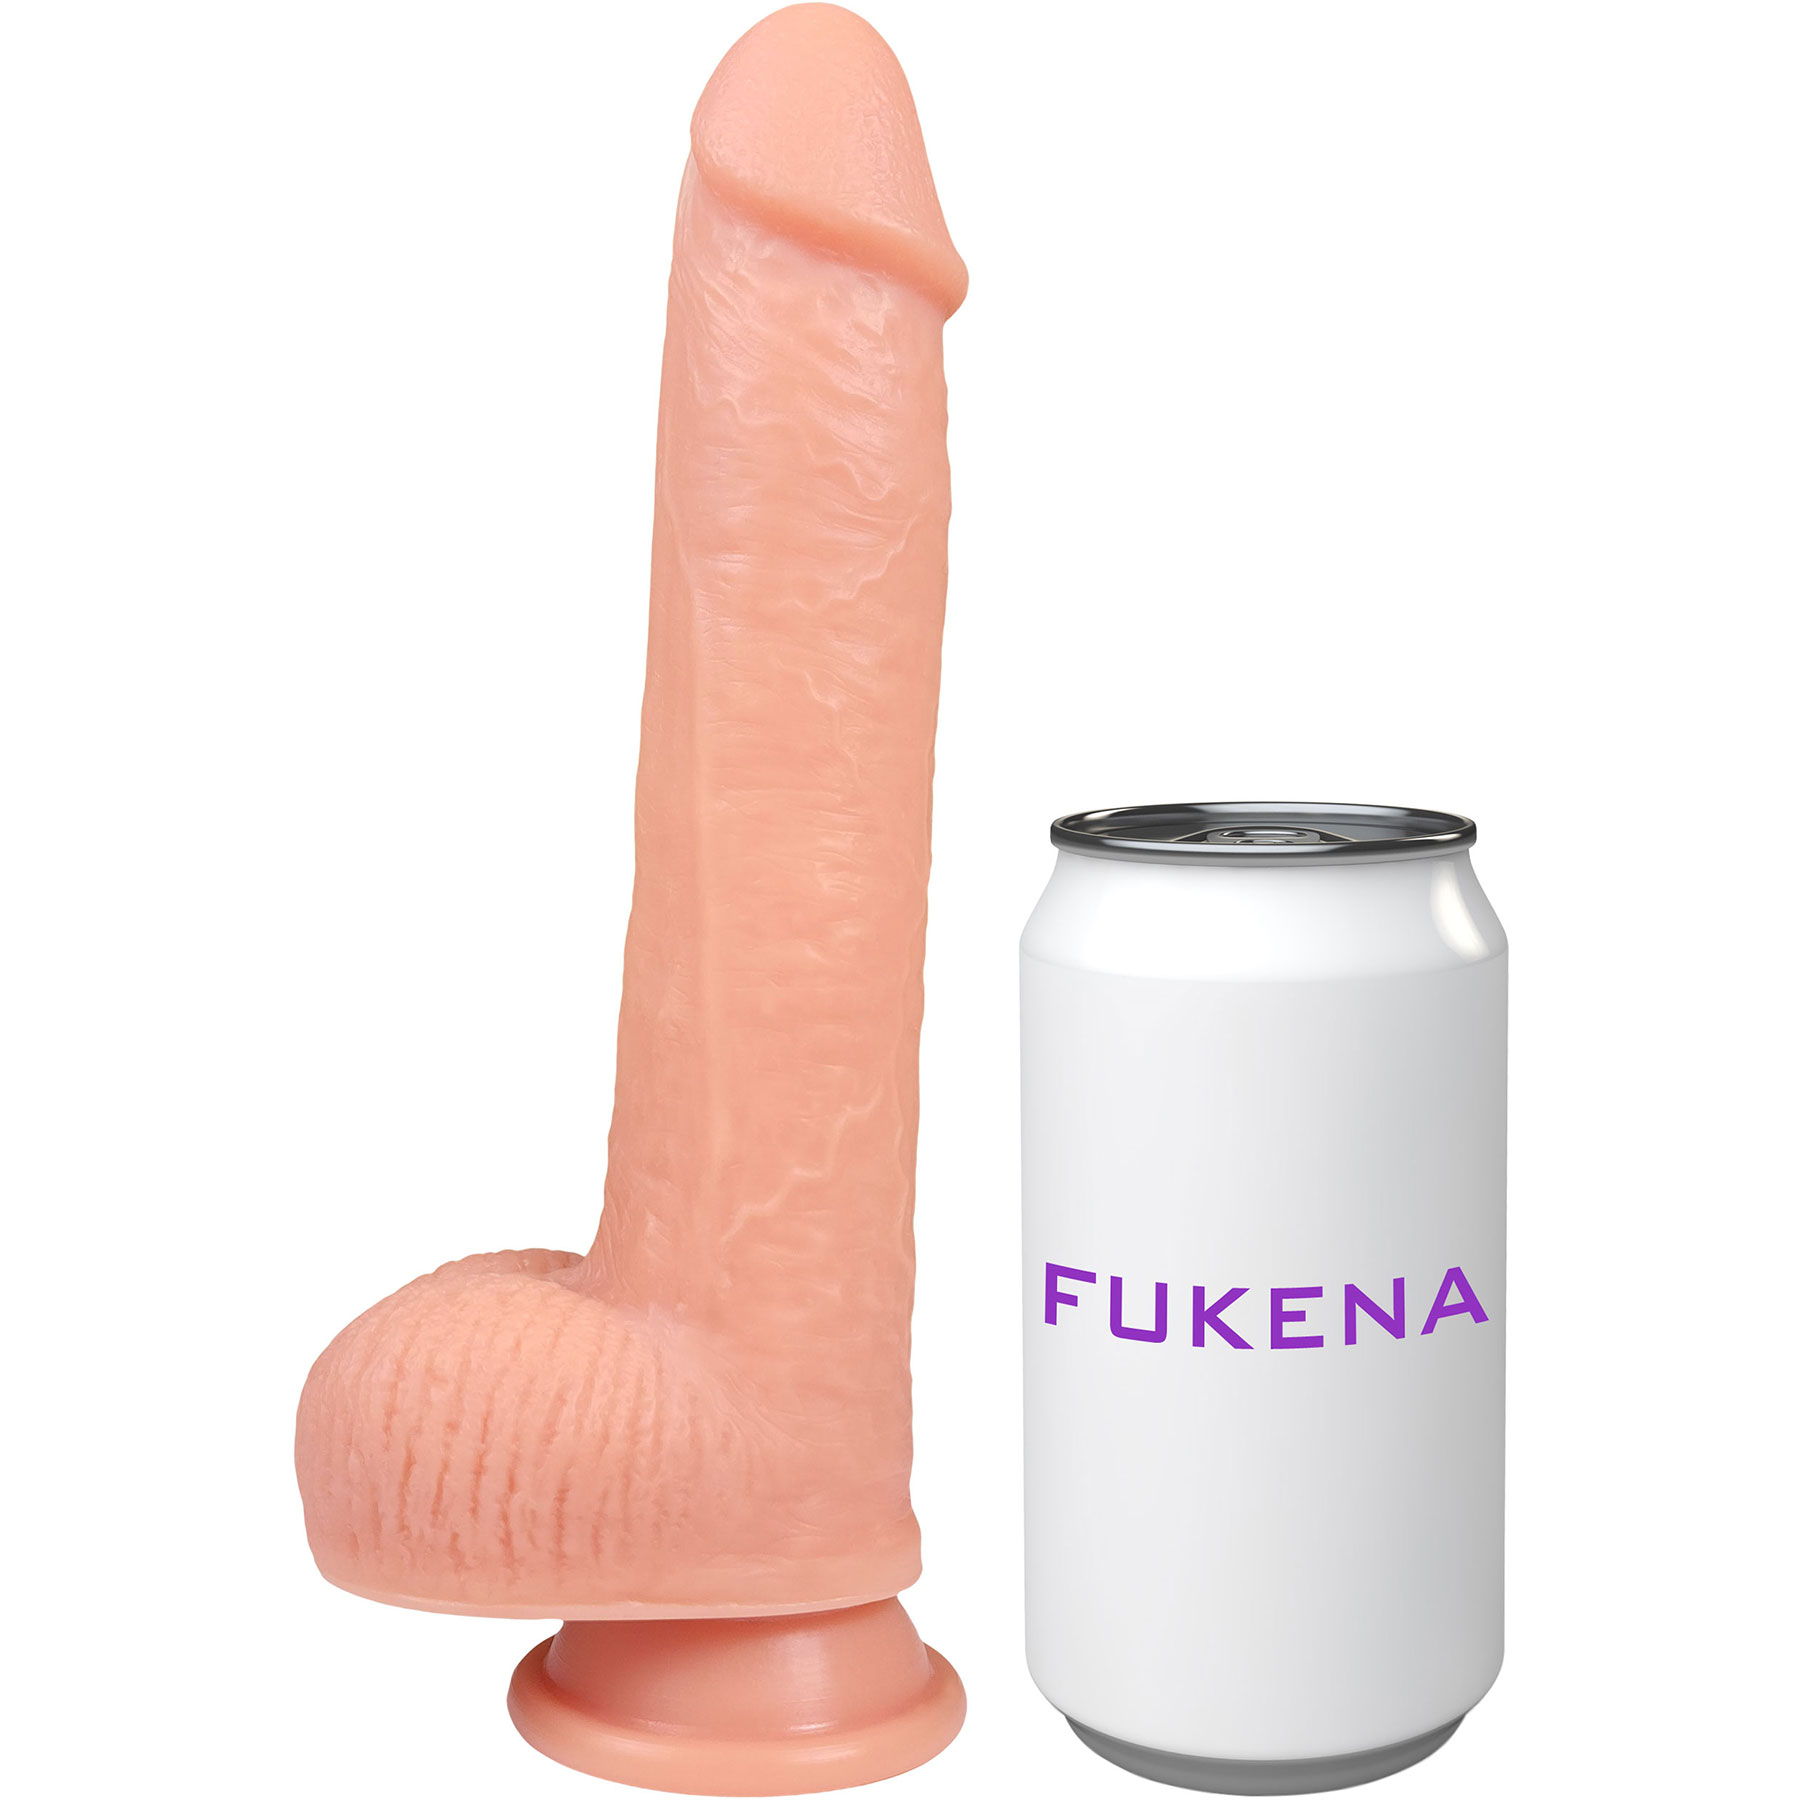 The Engineer 7 Inch Silicone Realistic Dildo With Balls & Suction Cup Base By Fukena - With Can For Size Reference